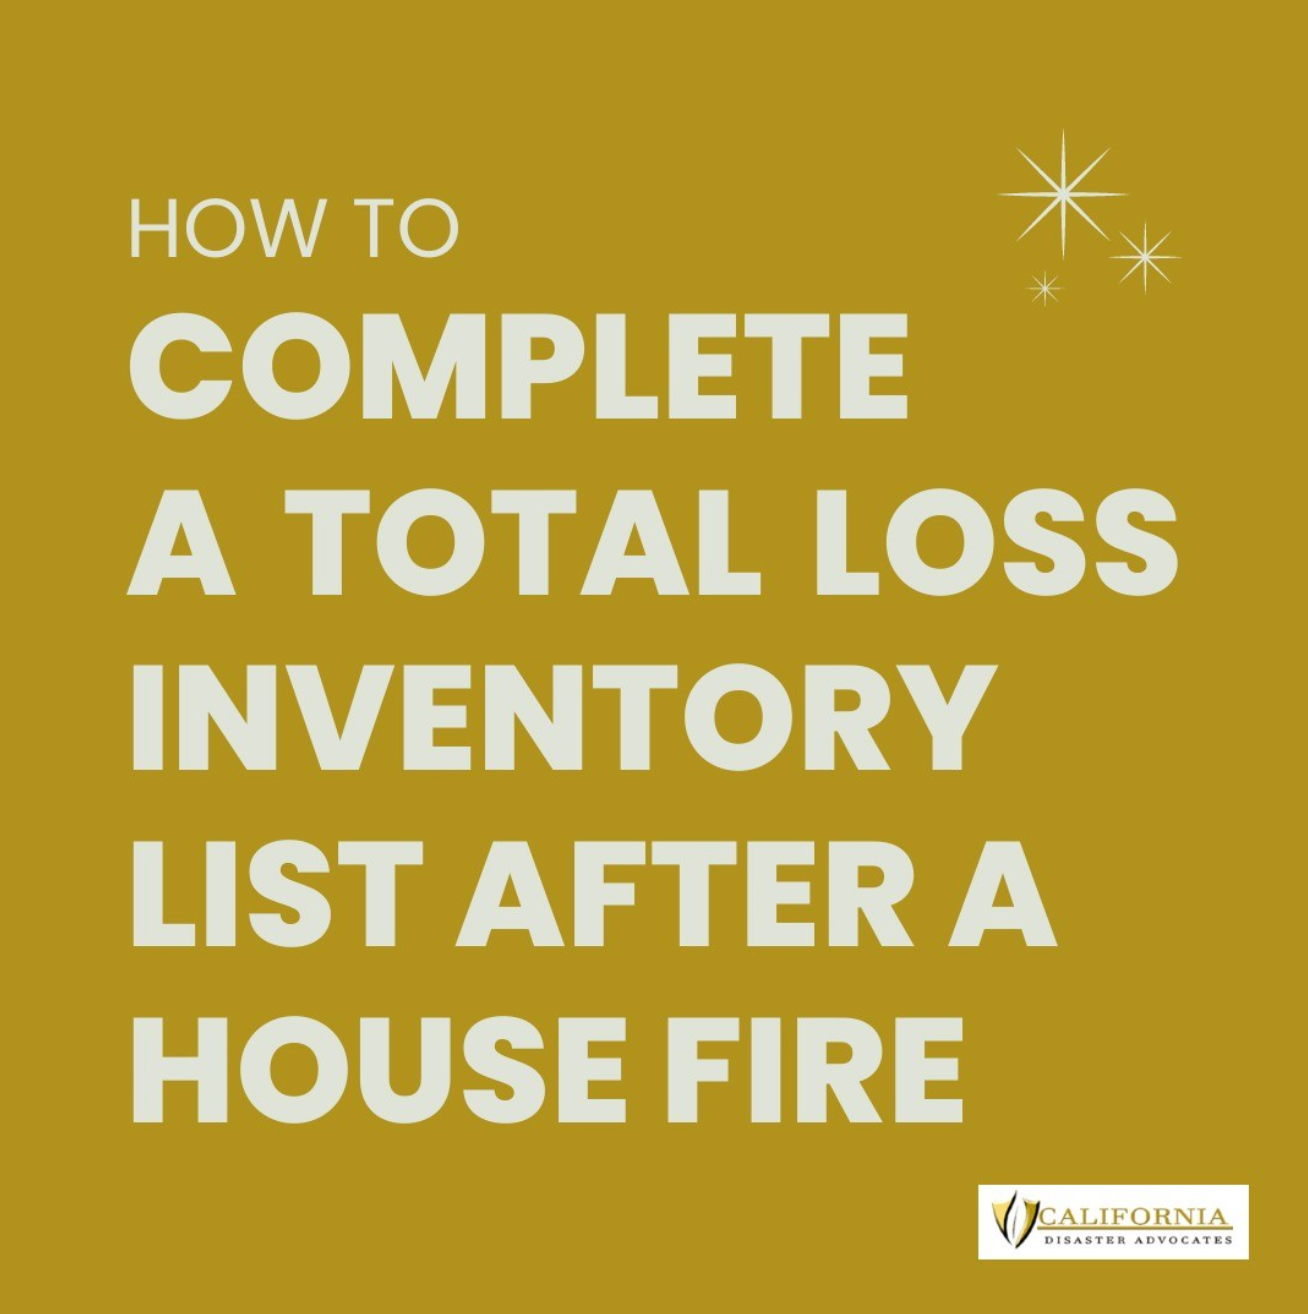 How To Complete a Total Loss Inventory List After a House Fire